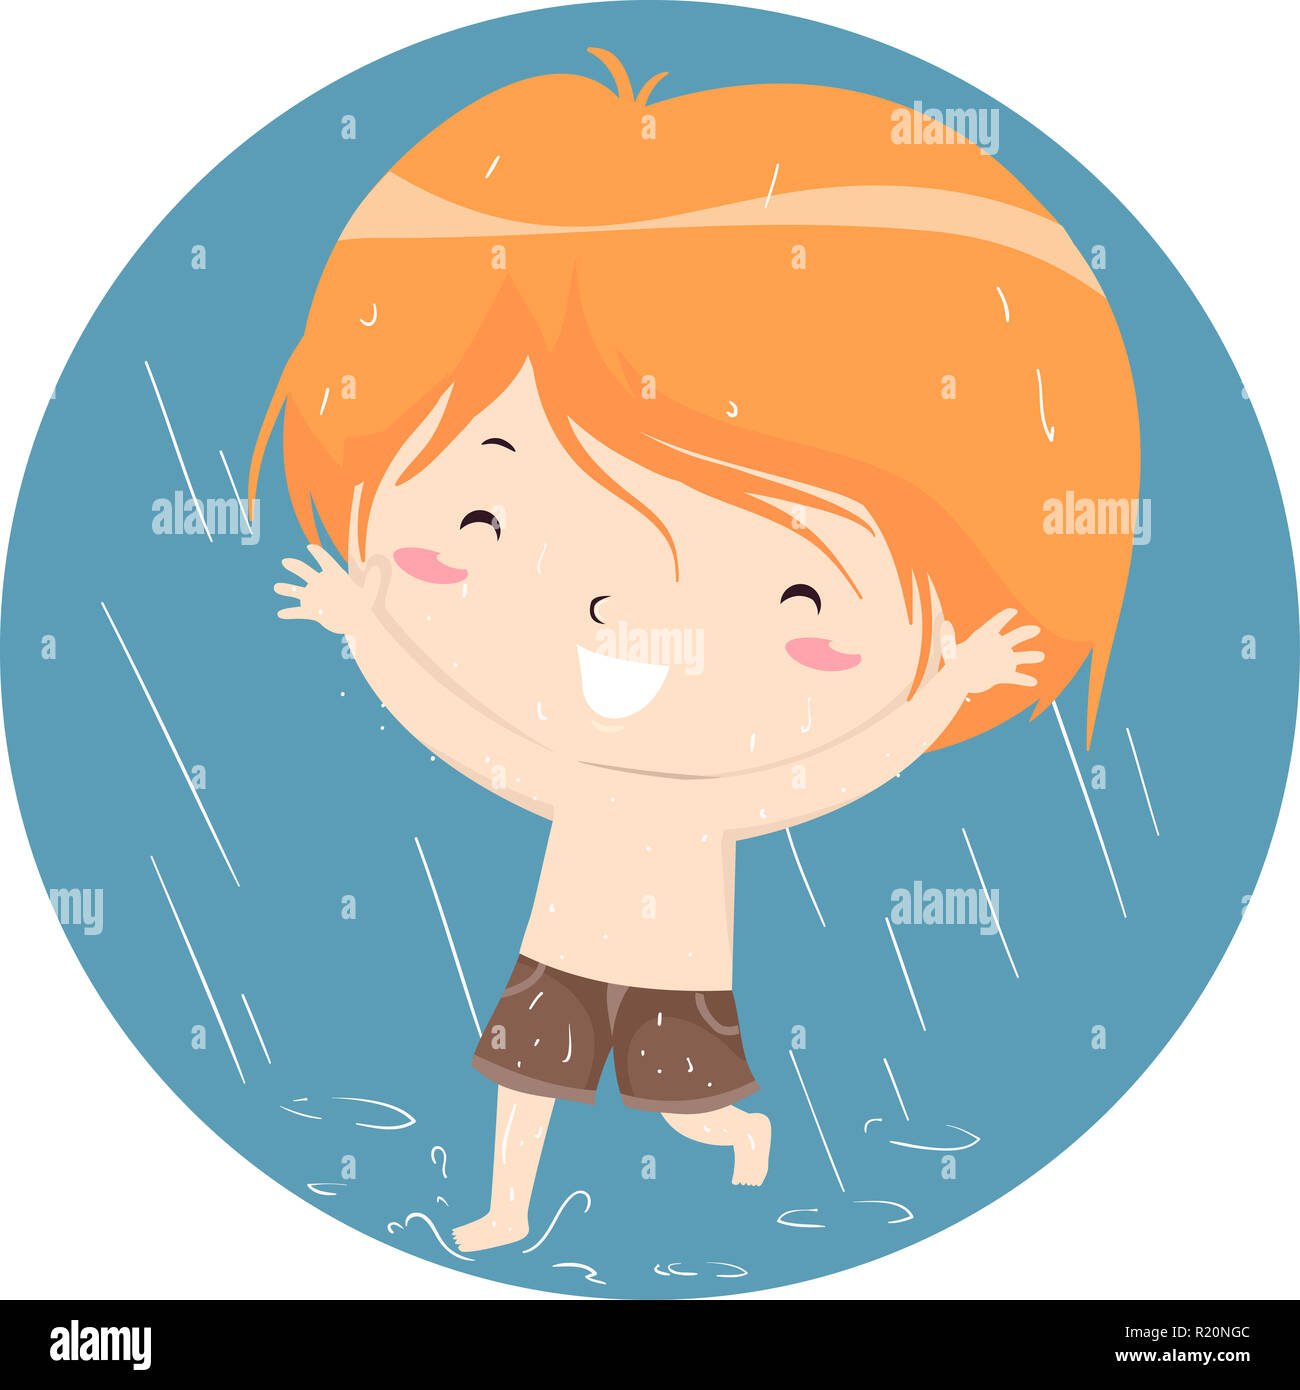 Colorful Illustration Featuring a Happy Little Boy Running Around While Getting Soaked in the Rain Stock Photo